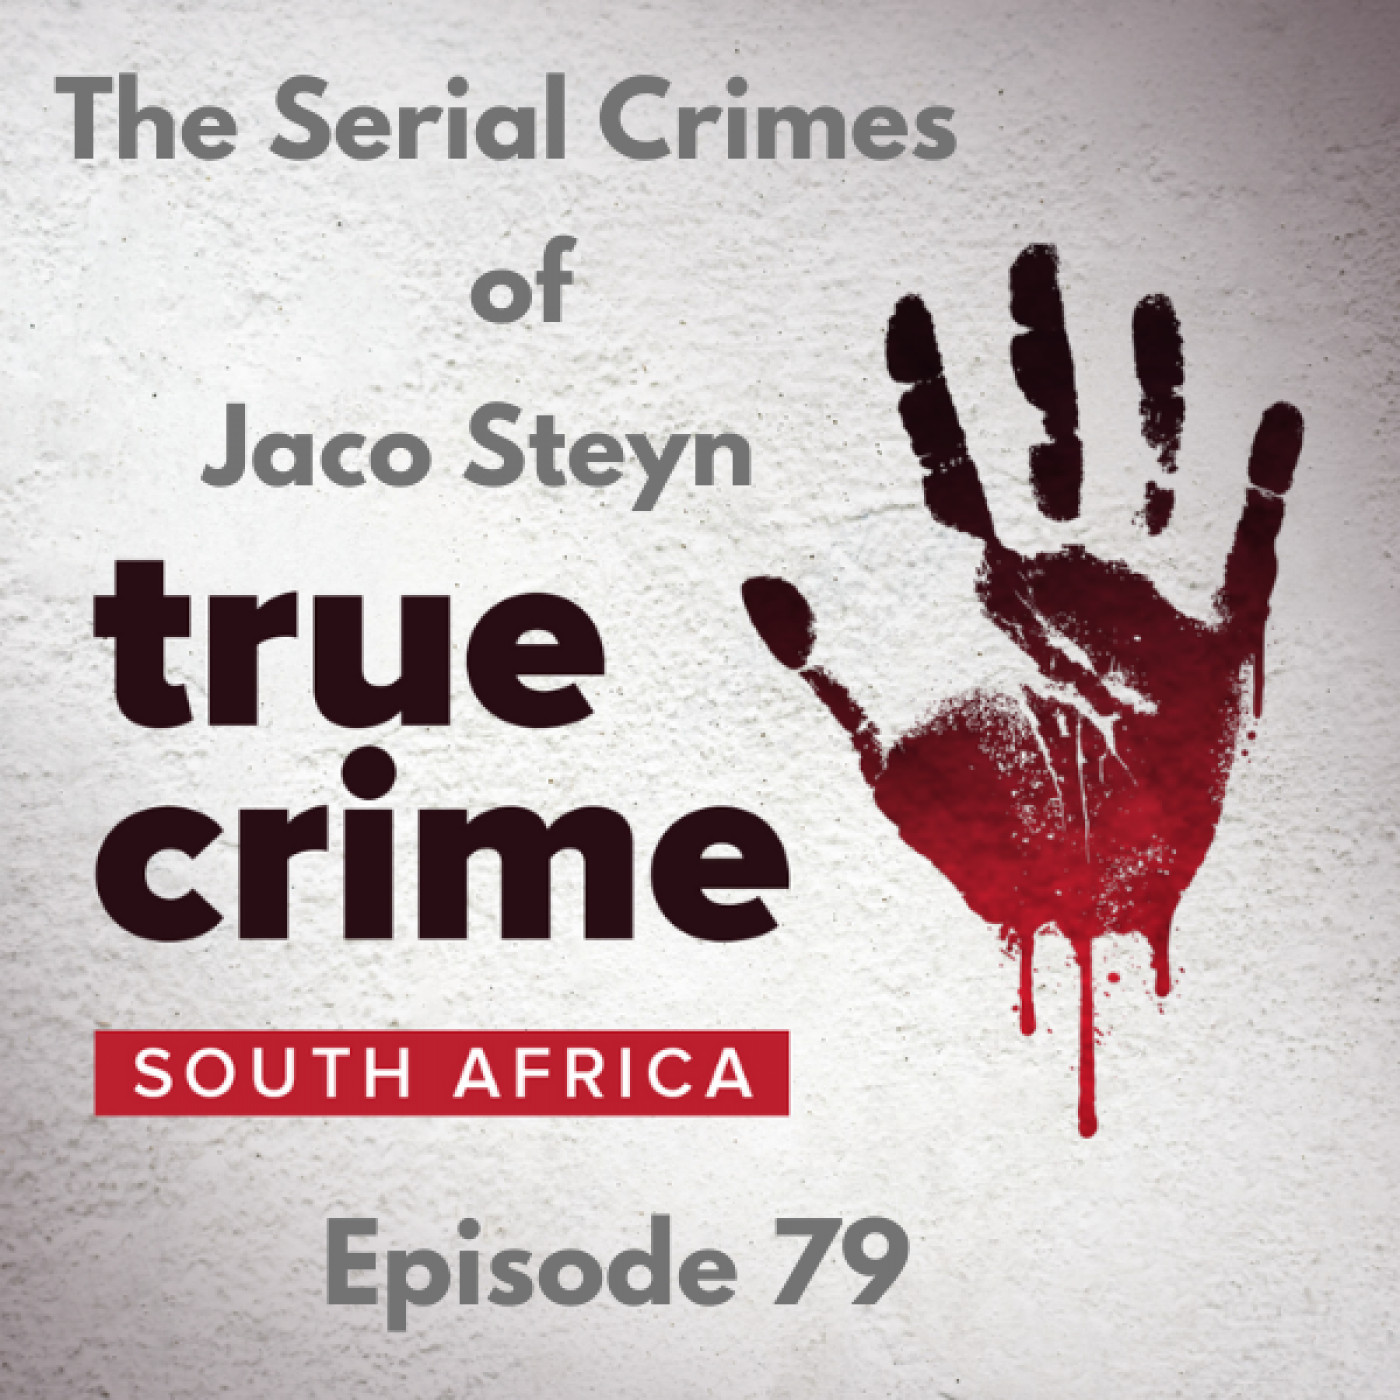 Episode 79 The Serial Crimes of Jaco Steyn